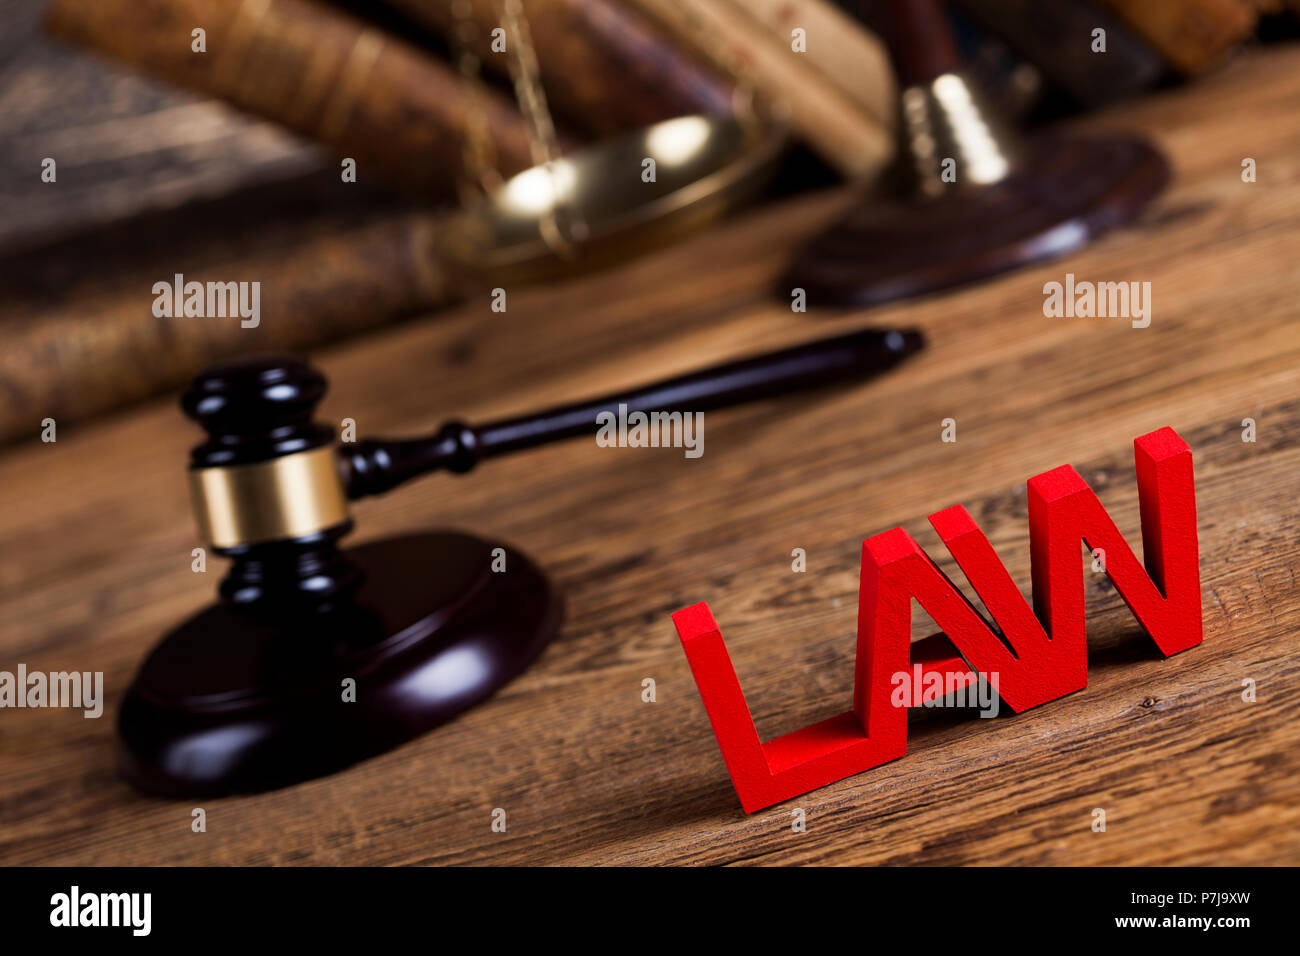 Law wooden gavel barrister, justice concept, legal system Stock Photo